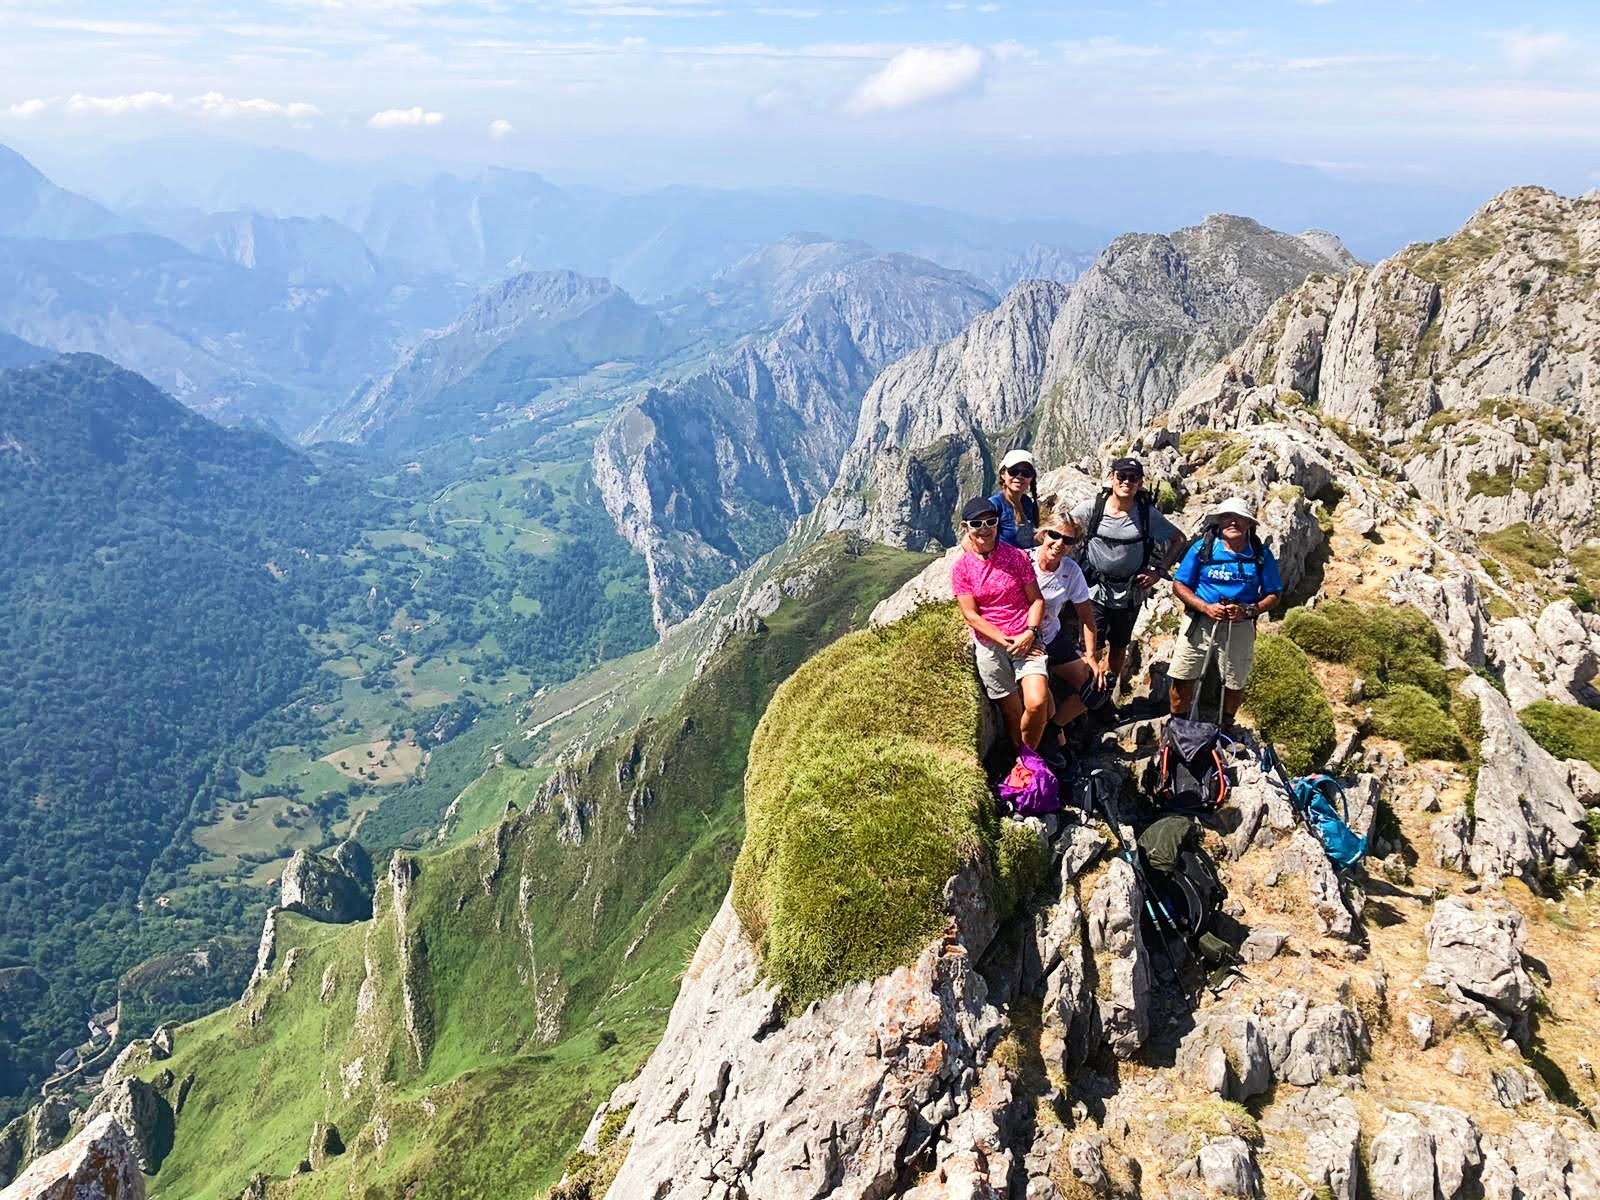 Hiking the wild highlands of Asturias, Spain's bear country